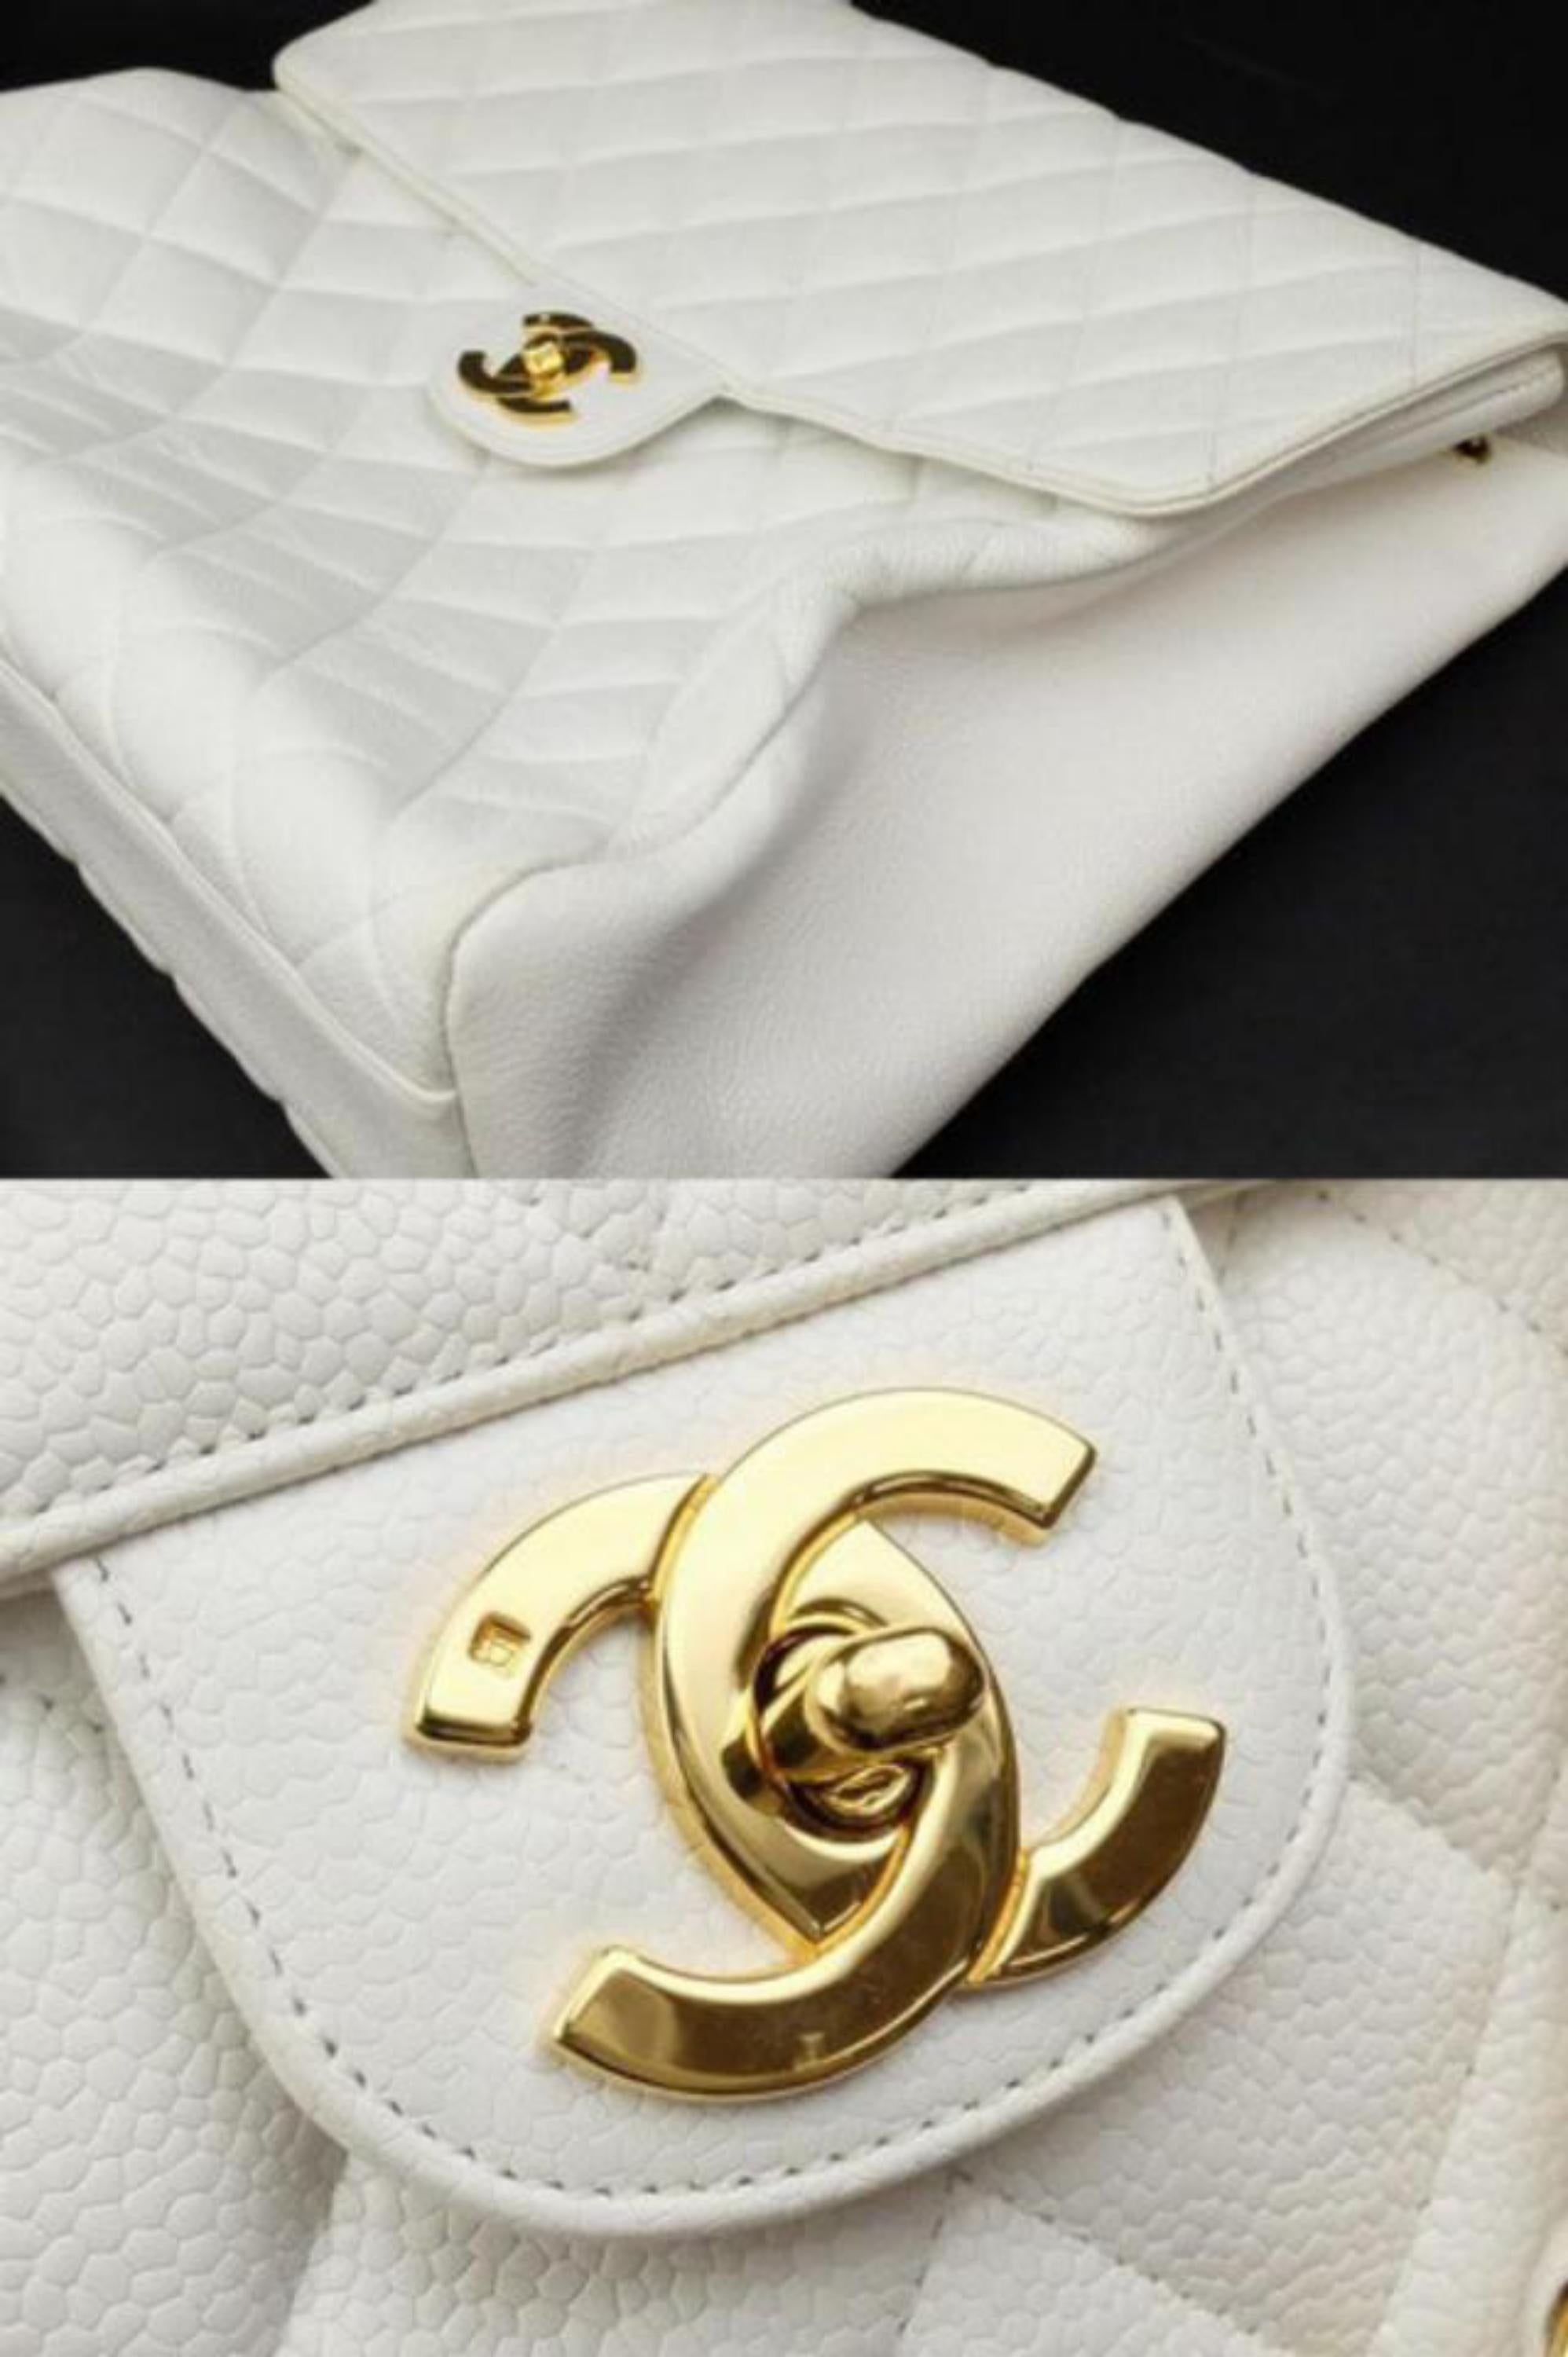 Chanel Extra Large Jumbo Caviar Flap 223129 White Leather Shoulder Bag For Sale 4